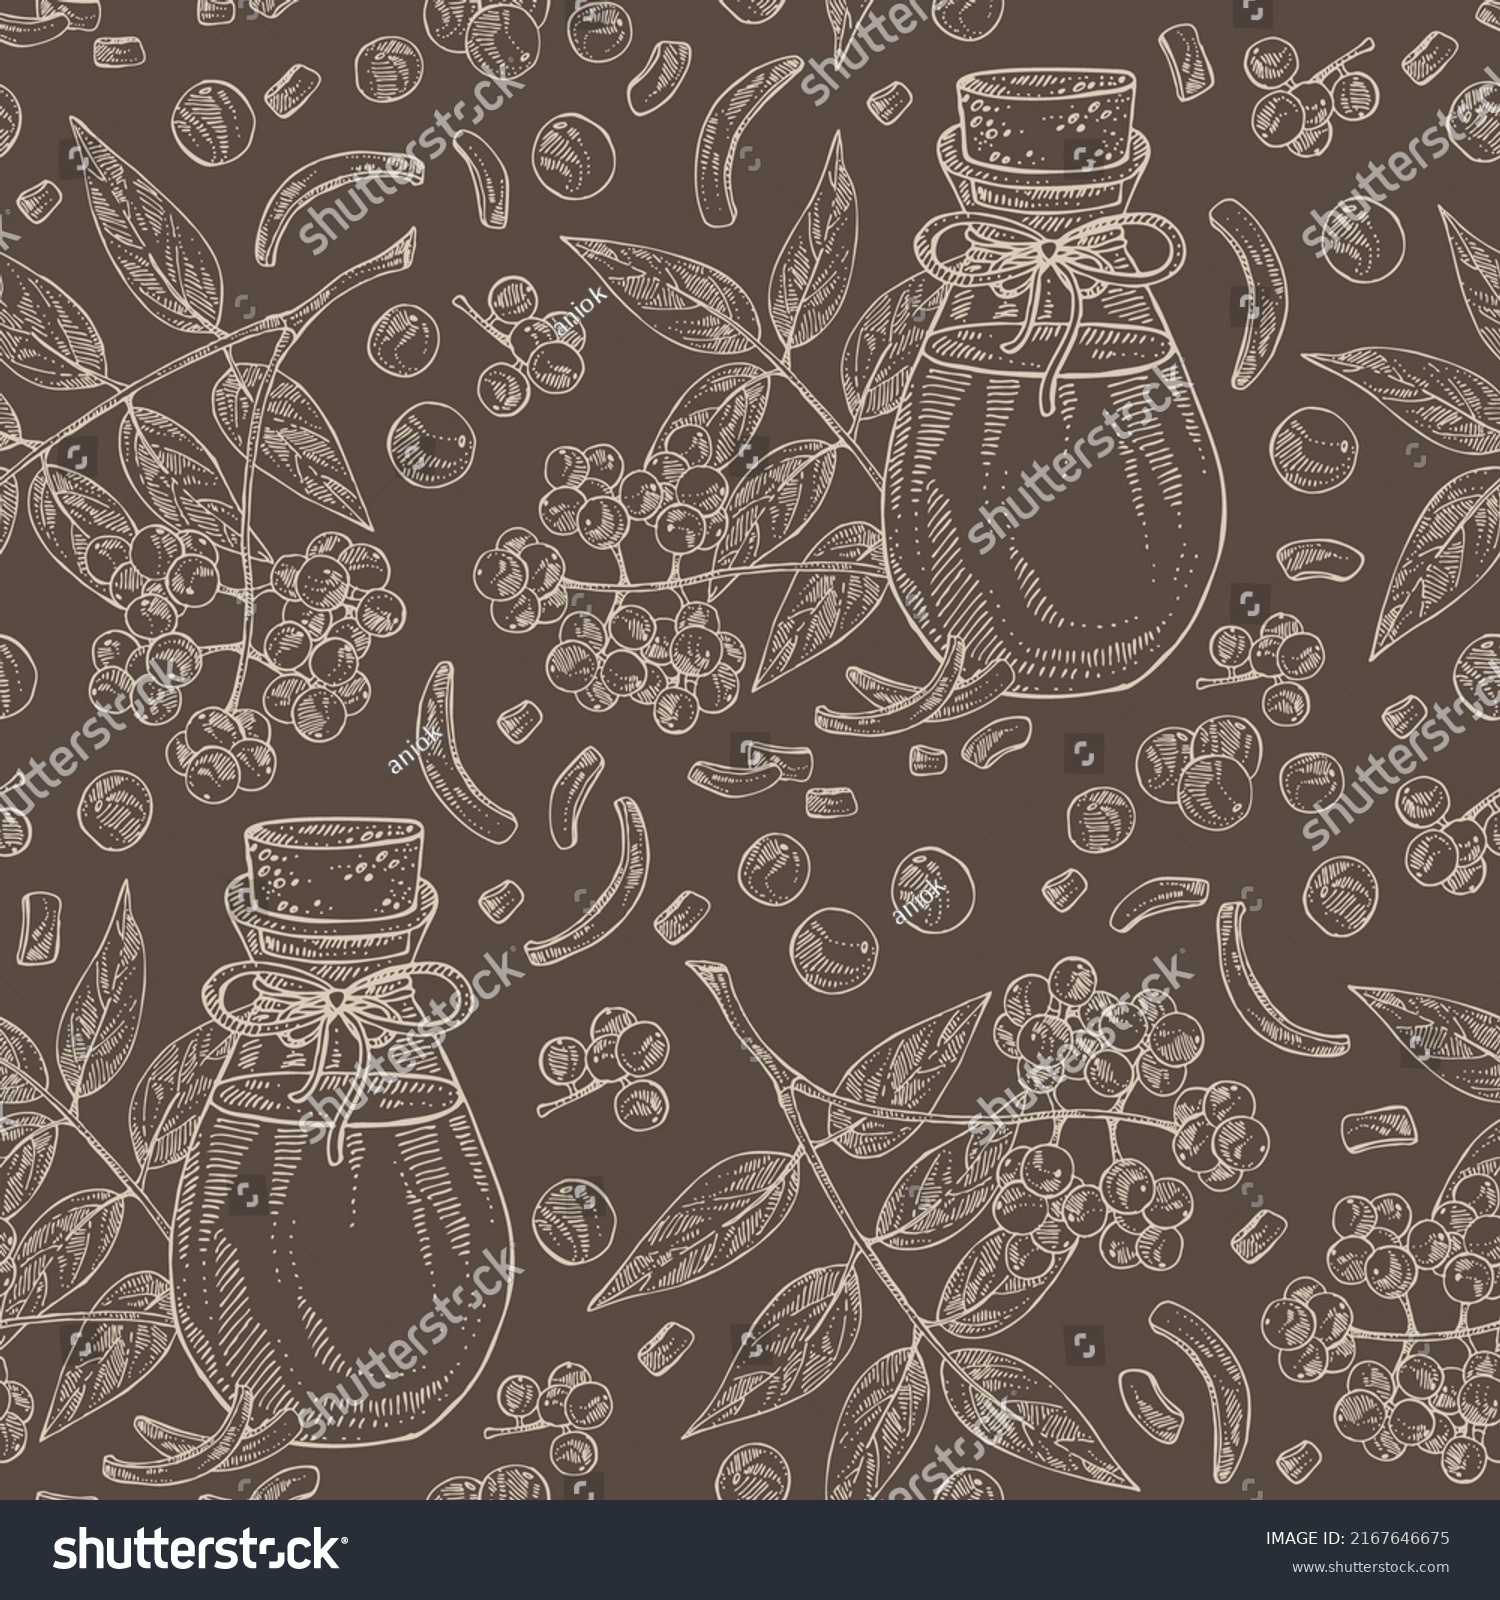 SVG of Seamless pattern with amur cork tree: berries, plant, amur cork tree bark and bottle of amur cork tree oil. Phellodendron amurense.  Cosmetic, perfumery and medical plant. svg